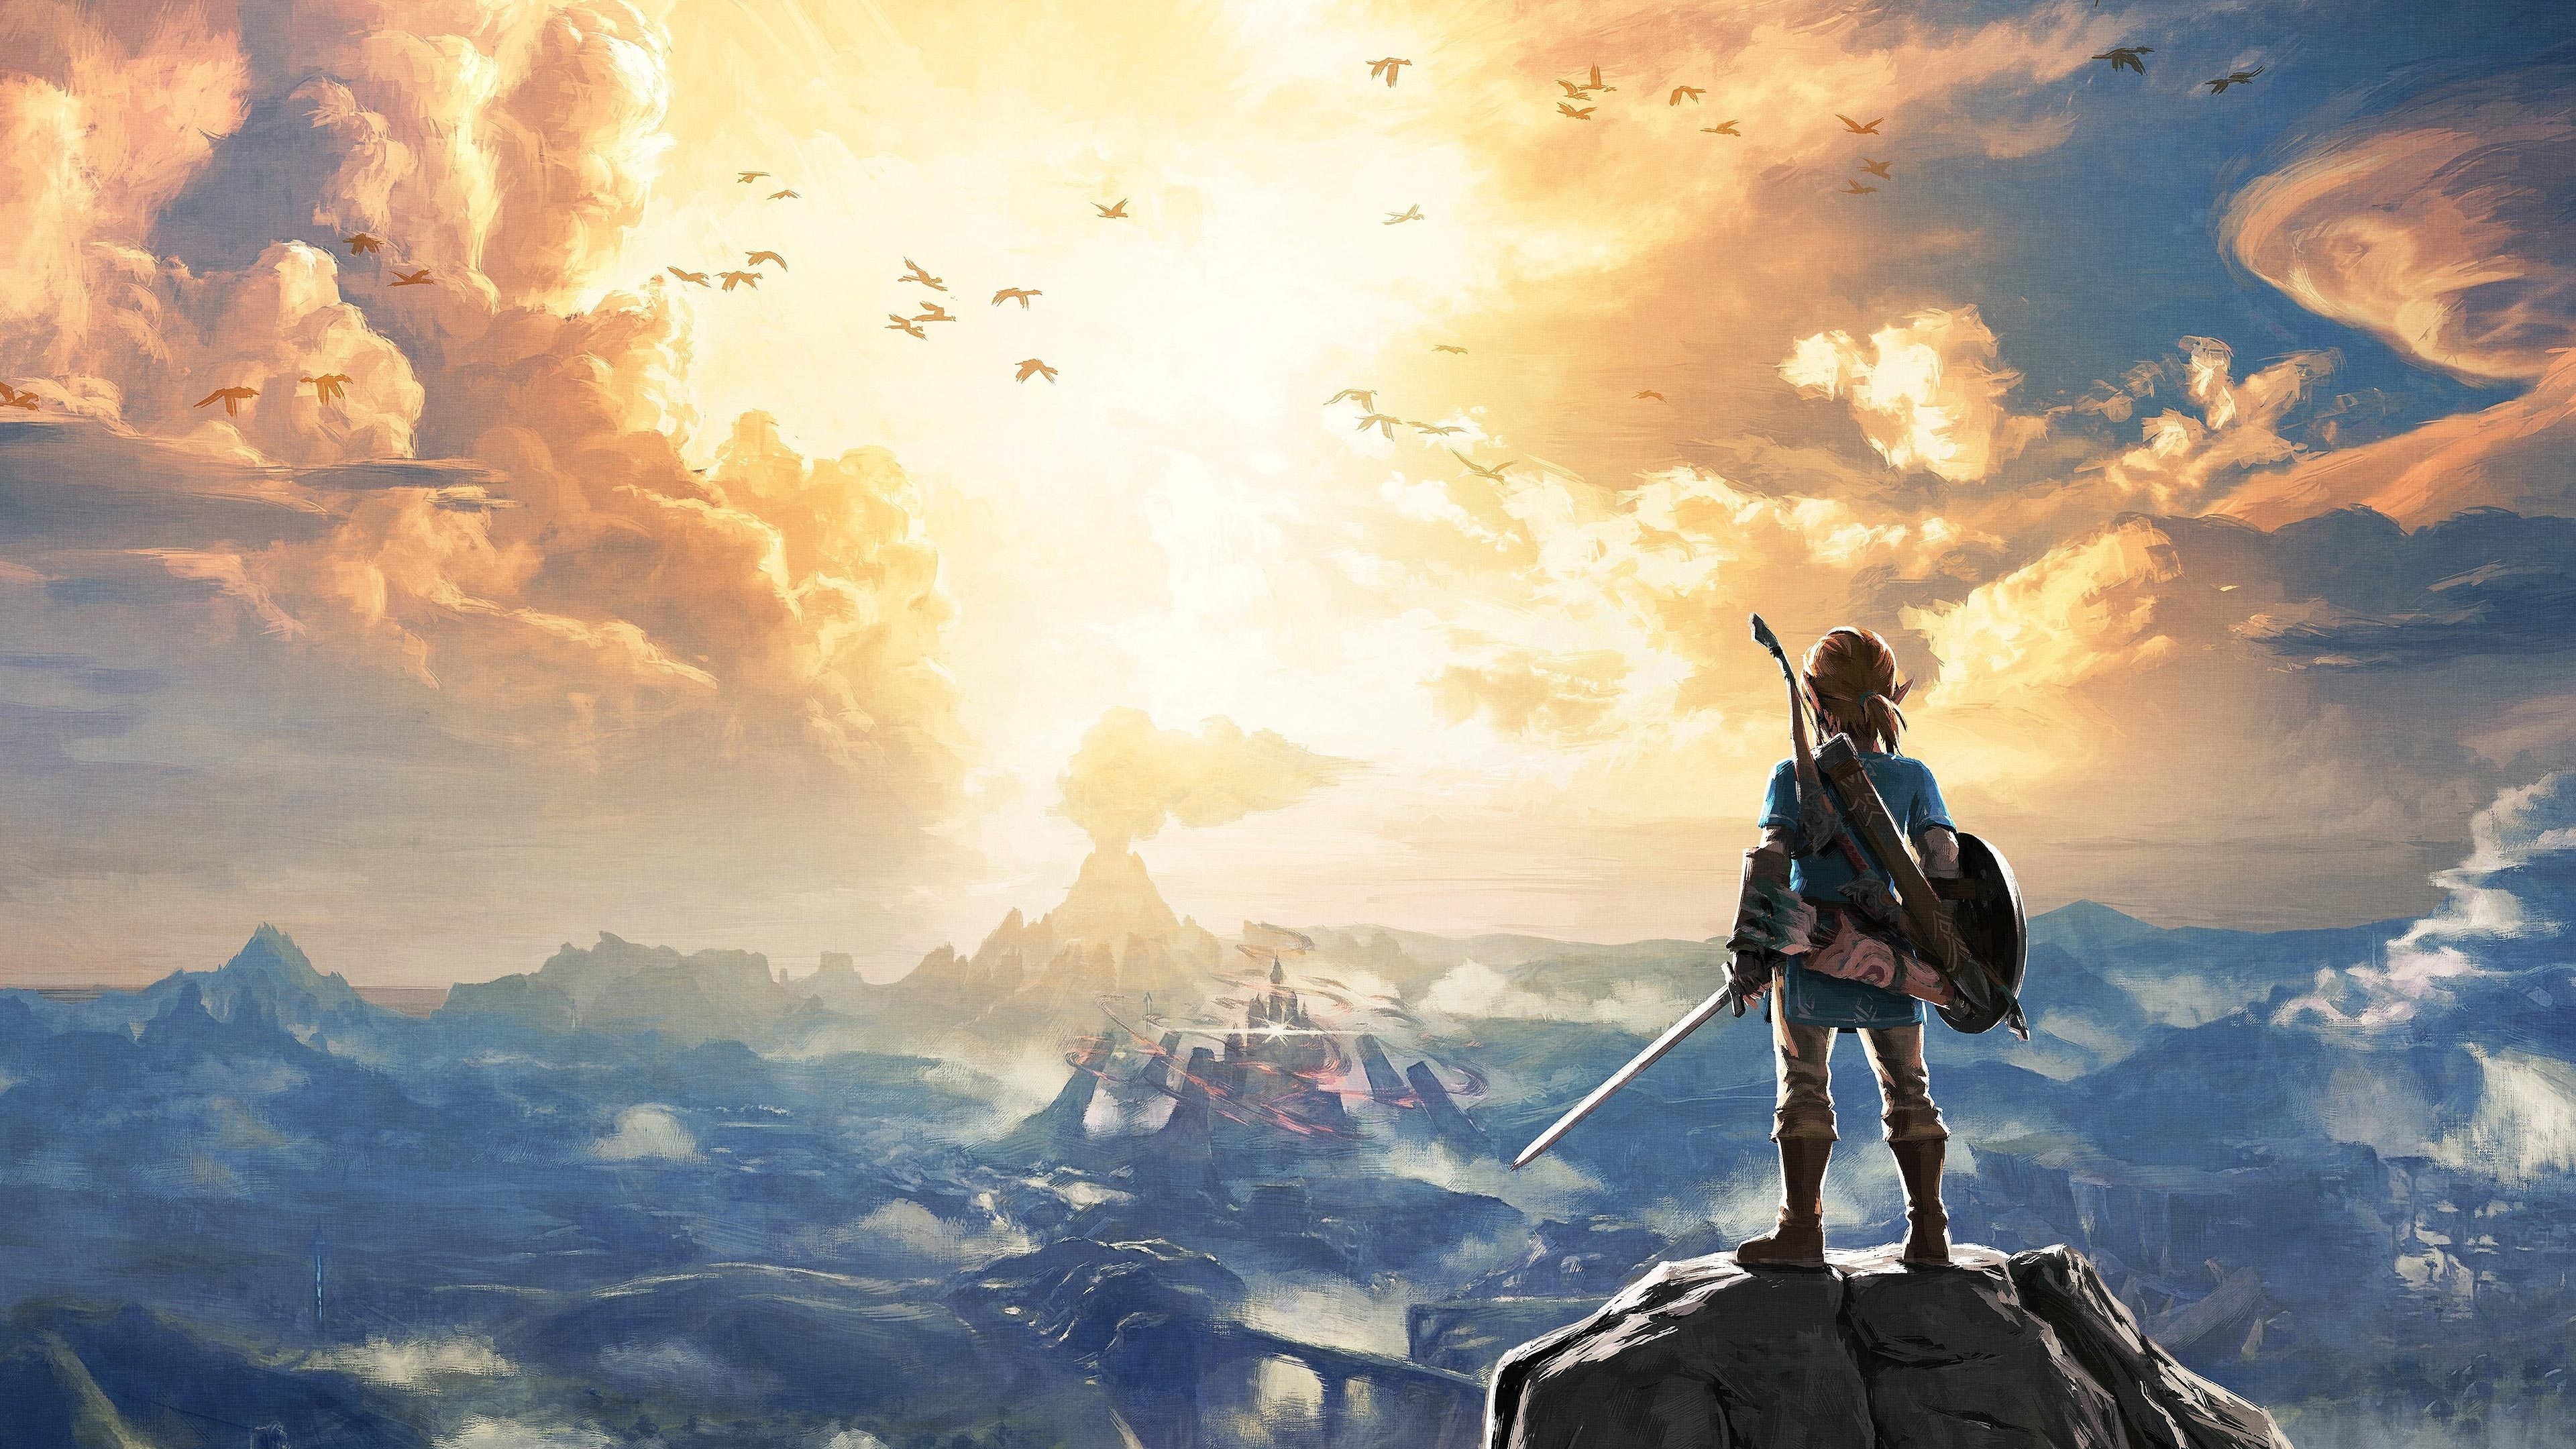 3840x2160, [updated For 4k] - Breath Of The Wild - HD Wallpaper 